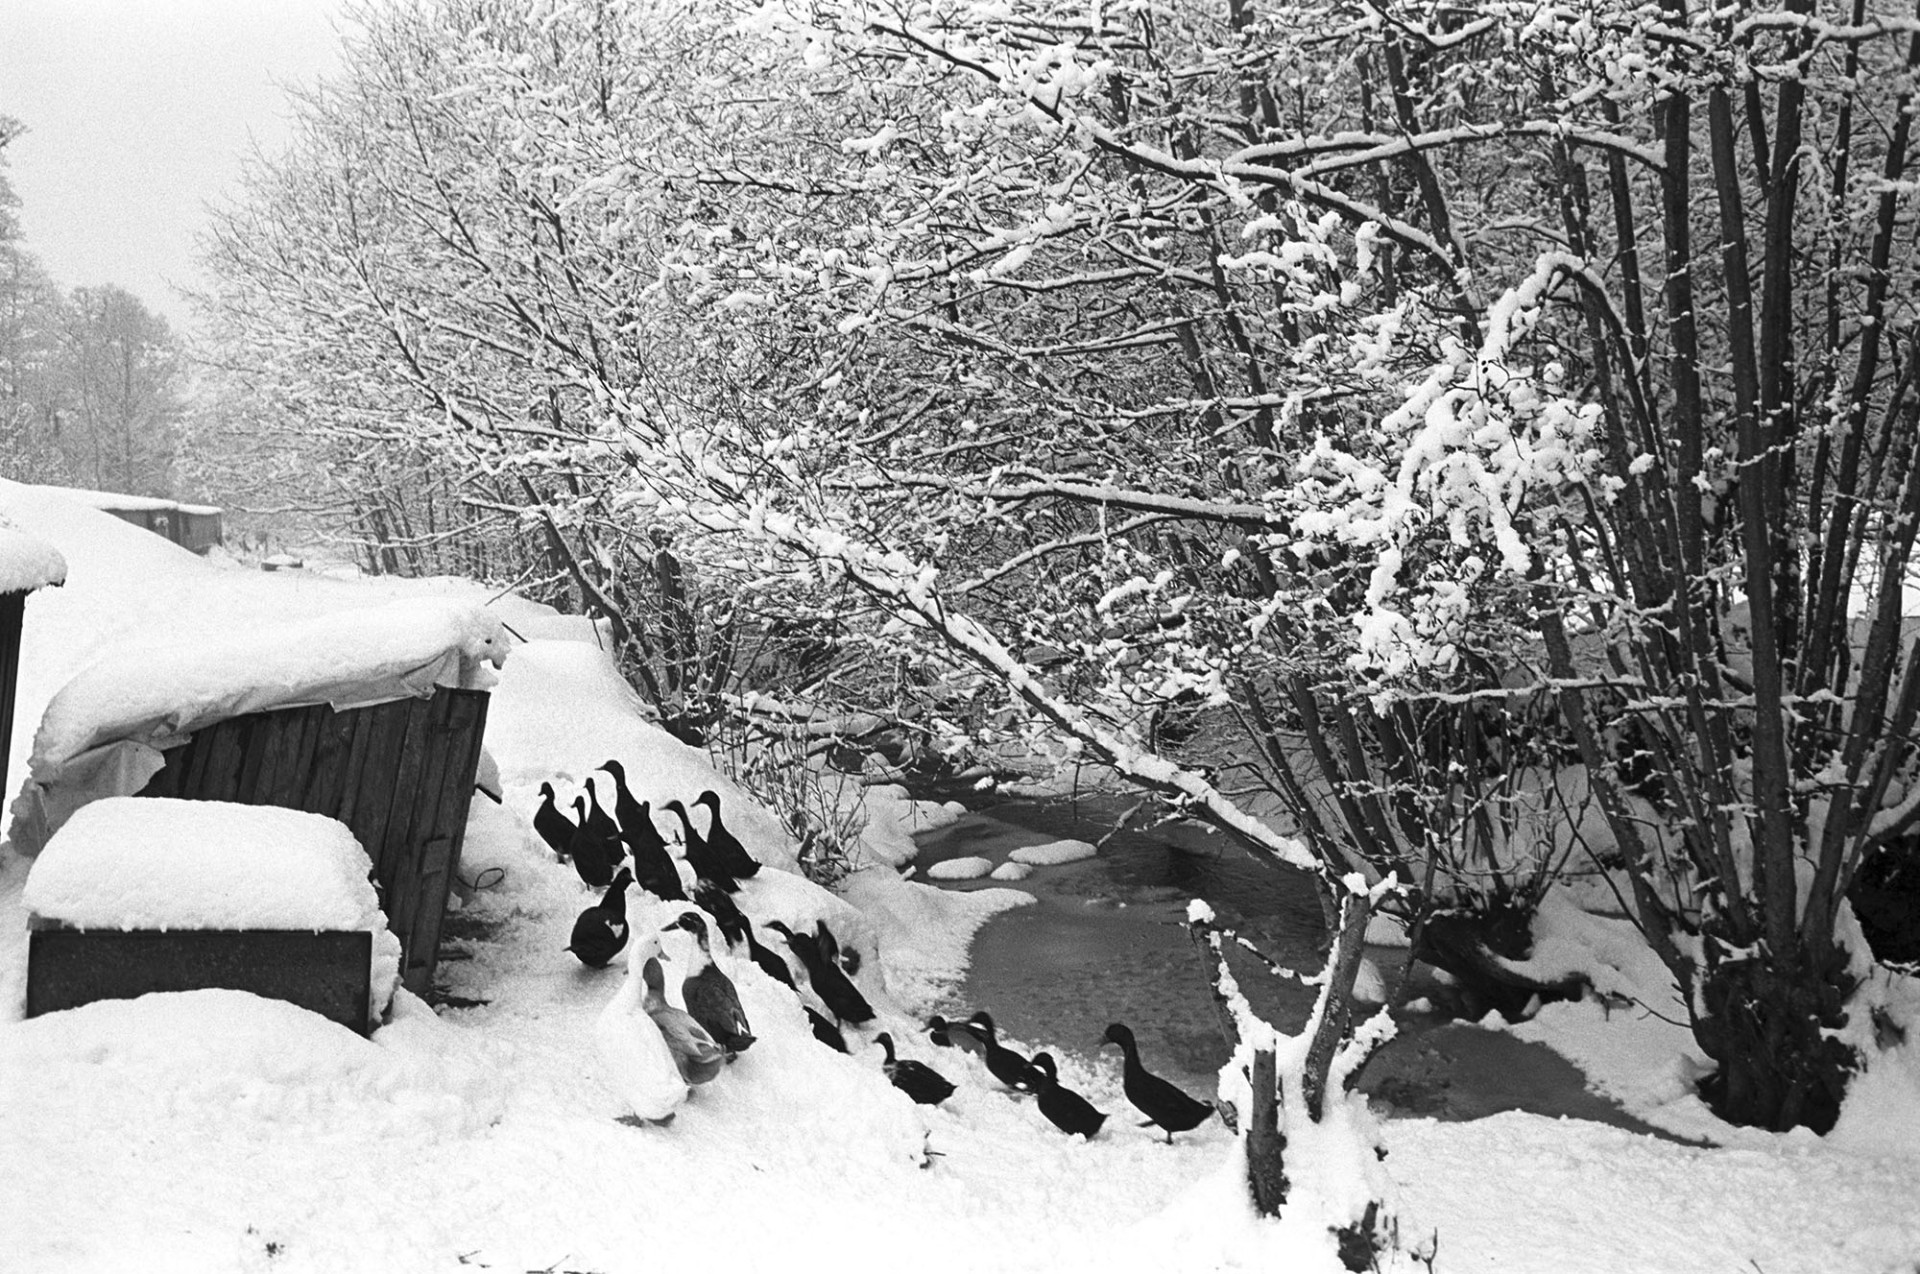 Snow, ducks beside frozen stream, snow covered trees. 
[A group of ducks in the snow beside a frozen stream and snow covered trees an sheds, at Millhams, Dolton.]